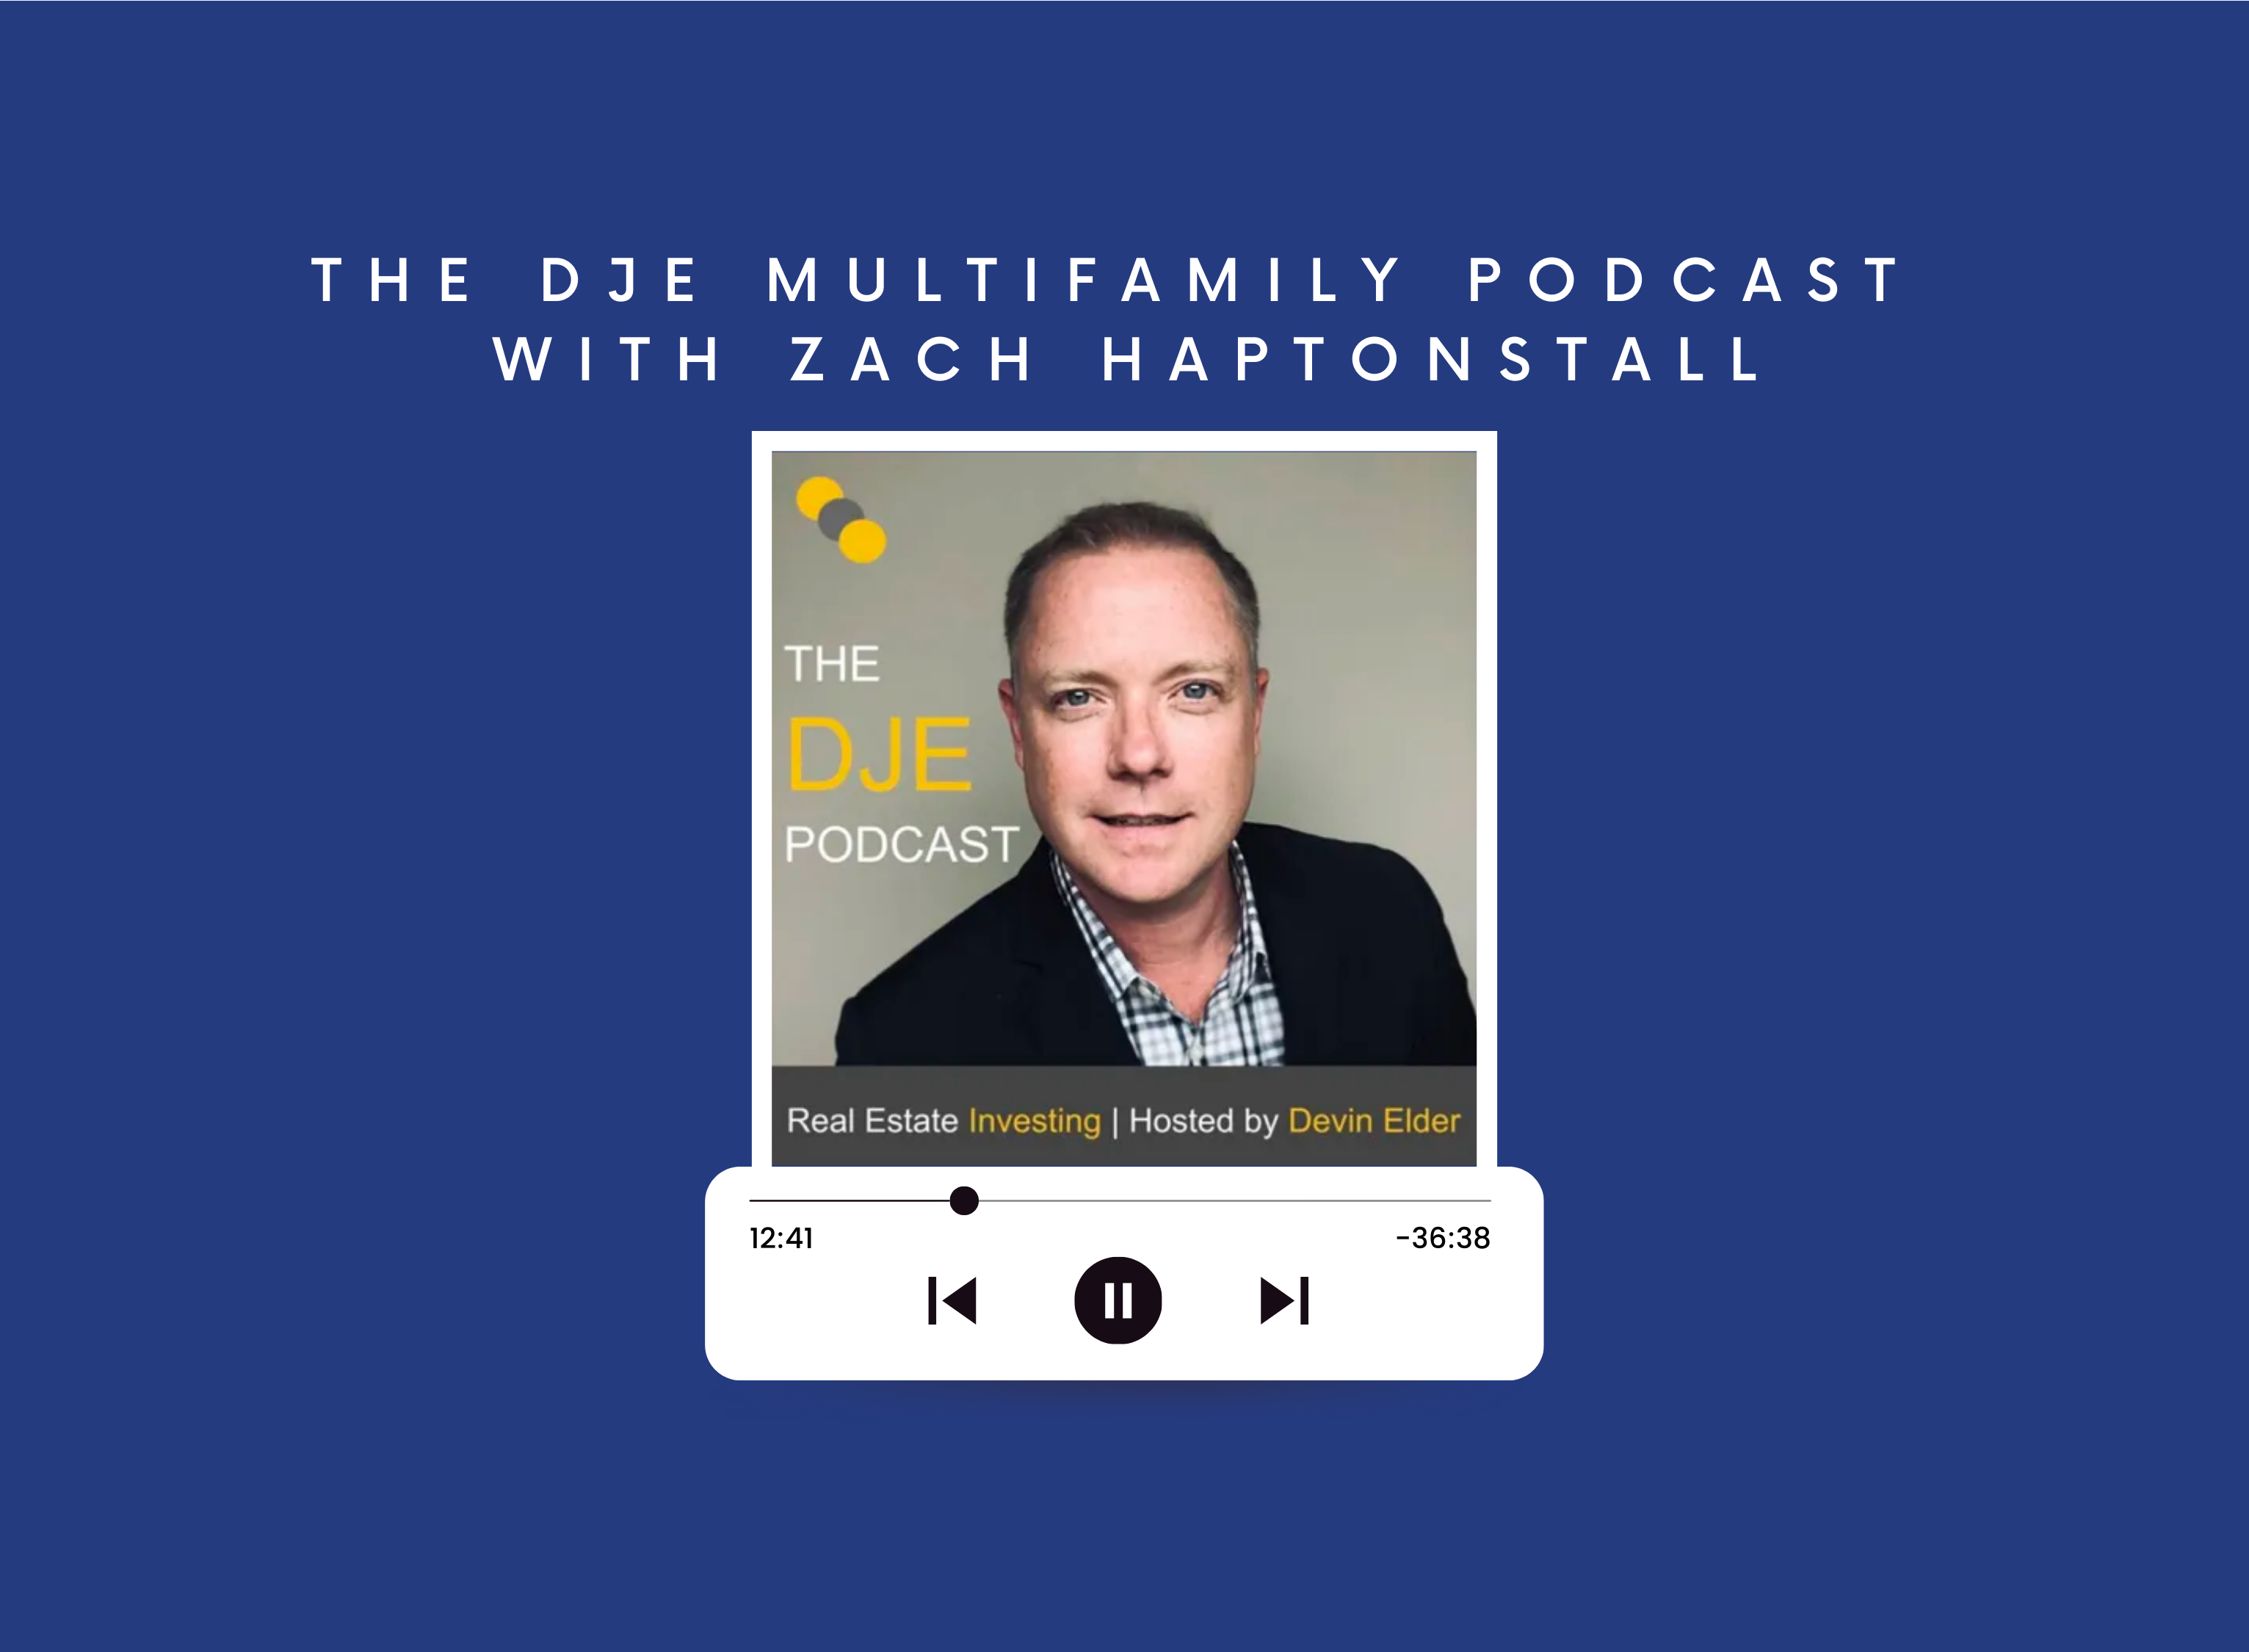 The DJE Multifamily Podcast